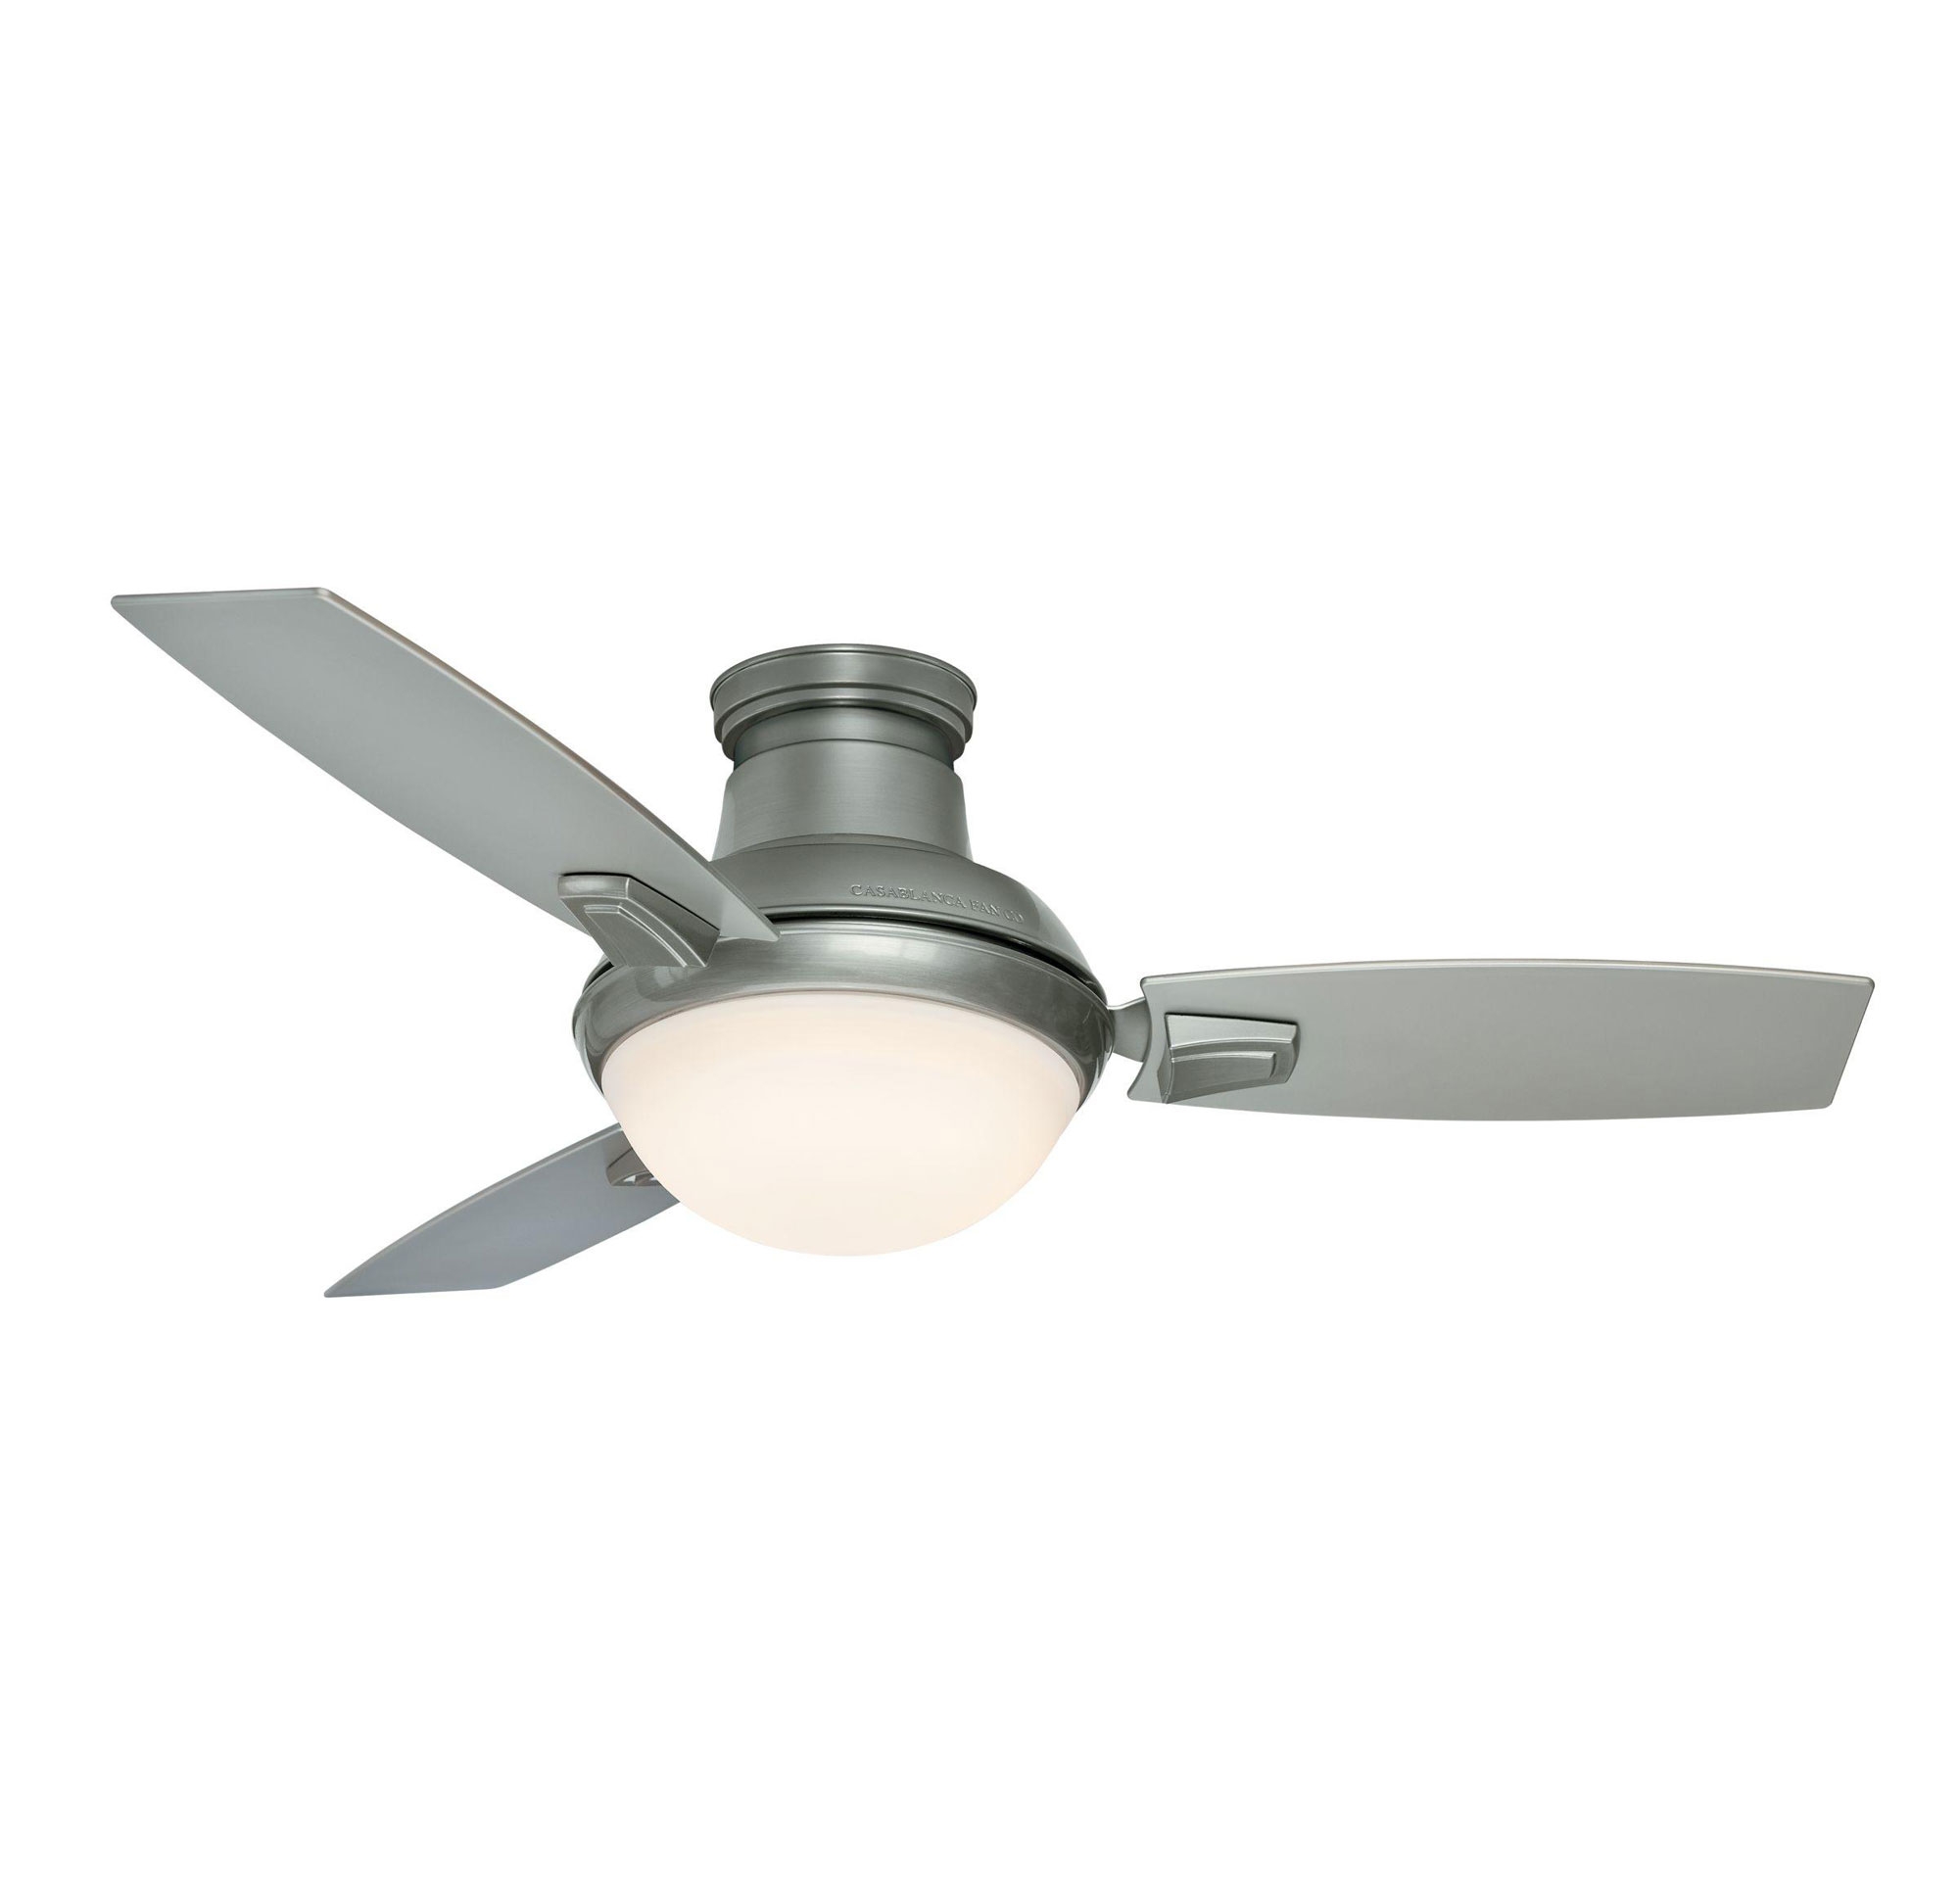 Casablanca Hugger Ceiling Fans With Lightsceiling fan fill your home with modern casablanca ceiling fans